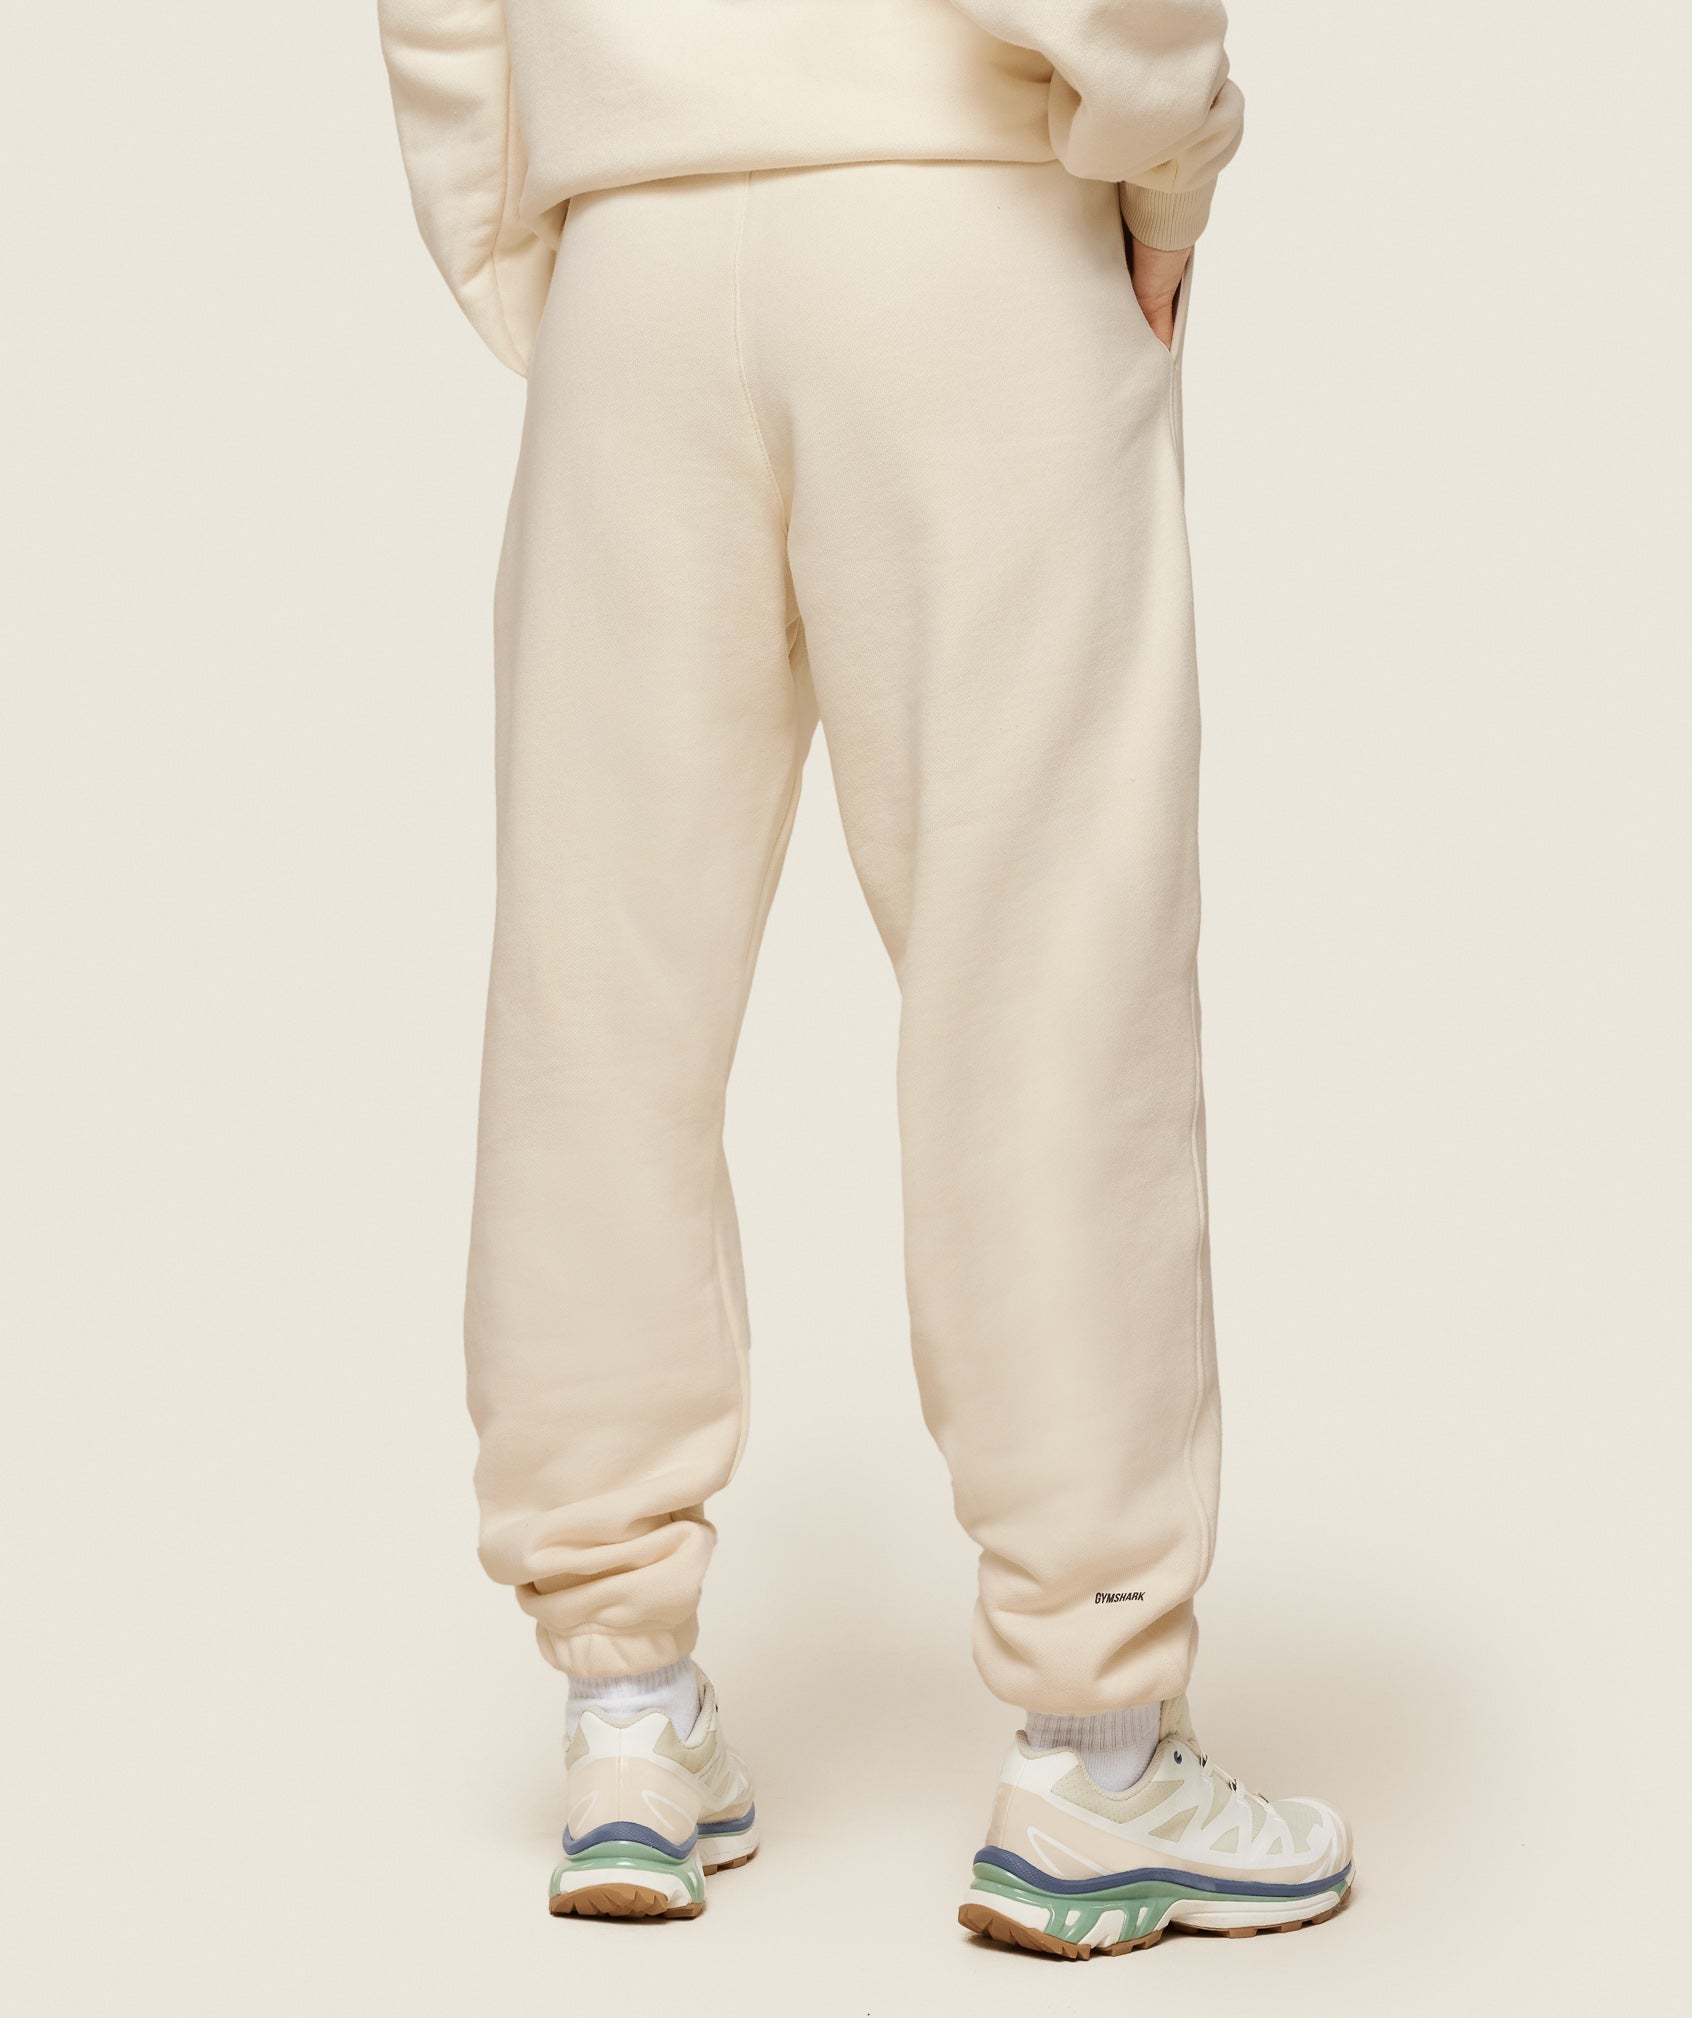 Phys Ed Graphic Sweatpants in Ecru White/Archive Brown - view 2